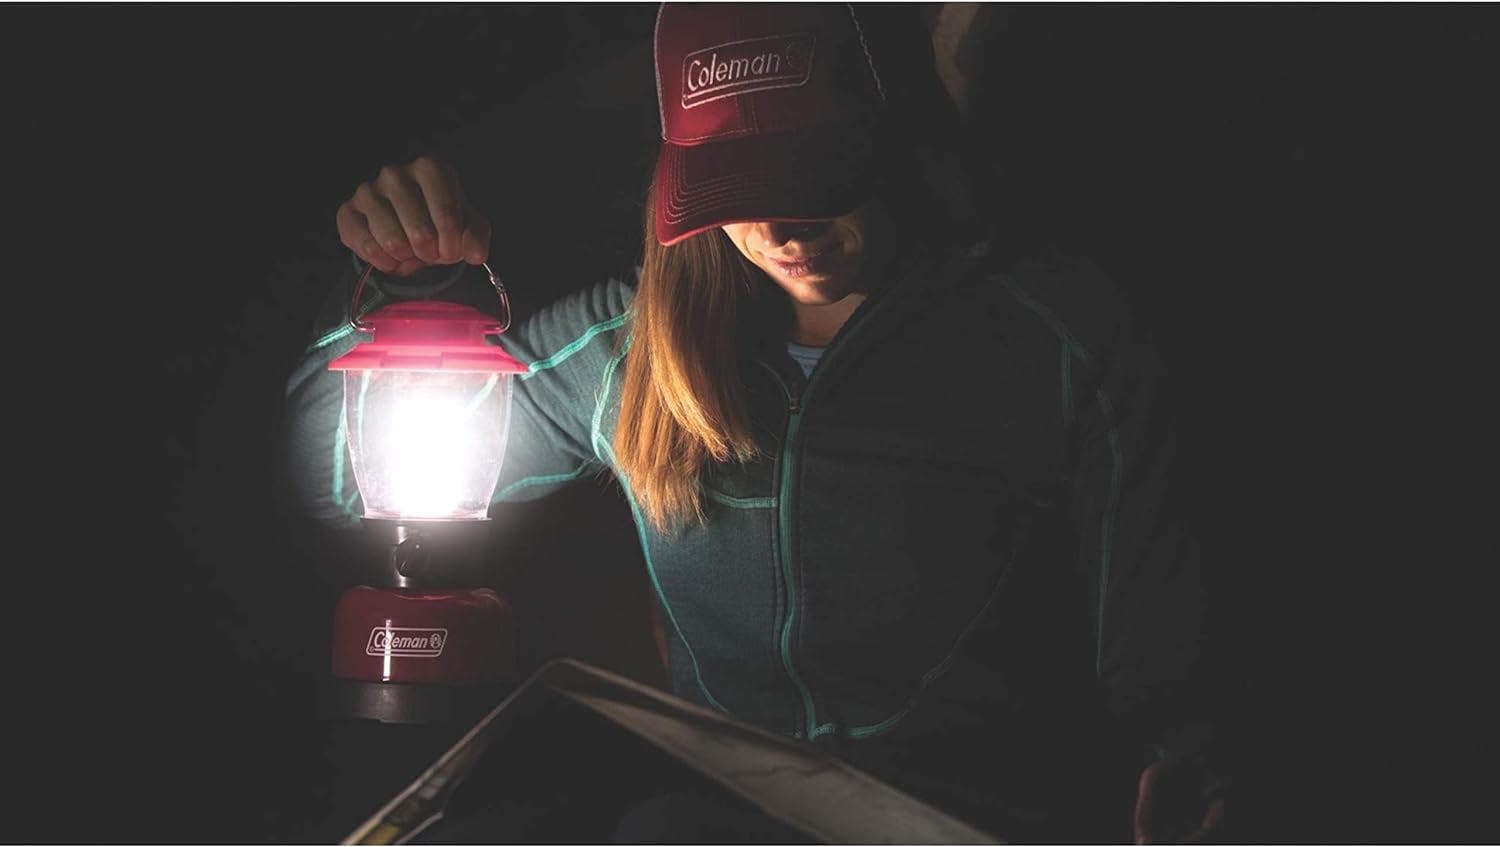 Classic Red 400 Lumens Durable LED Camping Lantern